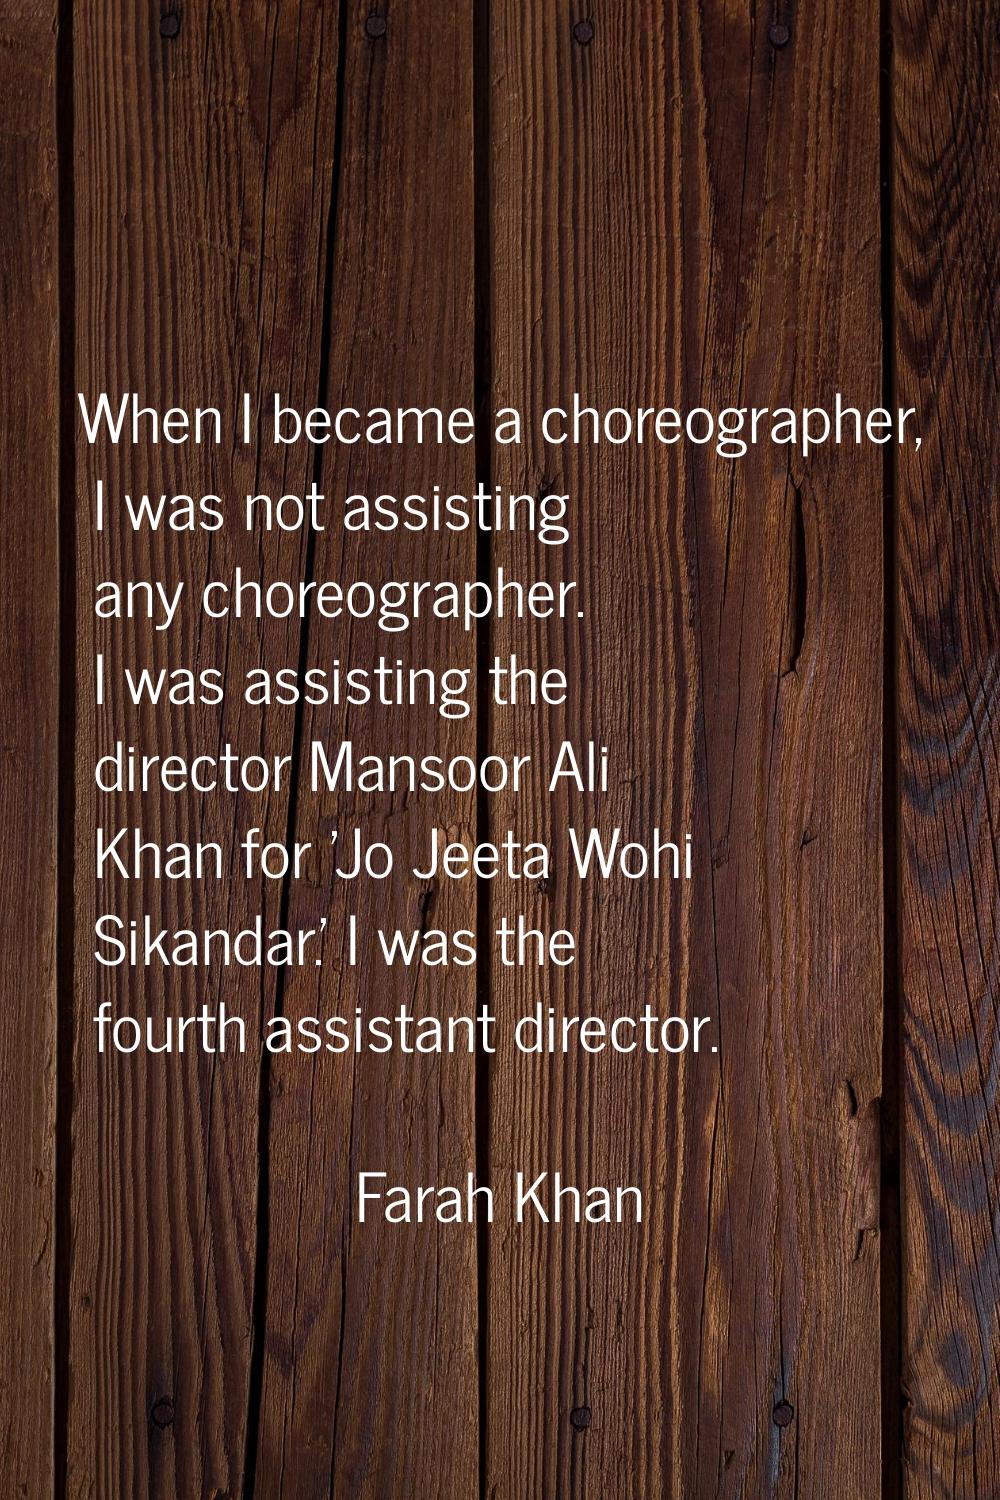 When I became a choreographer, I was not assisting any choreographer. I was assisting the director 